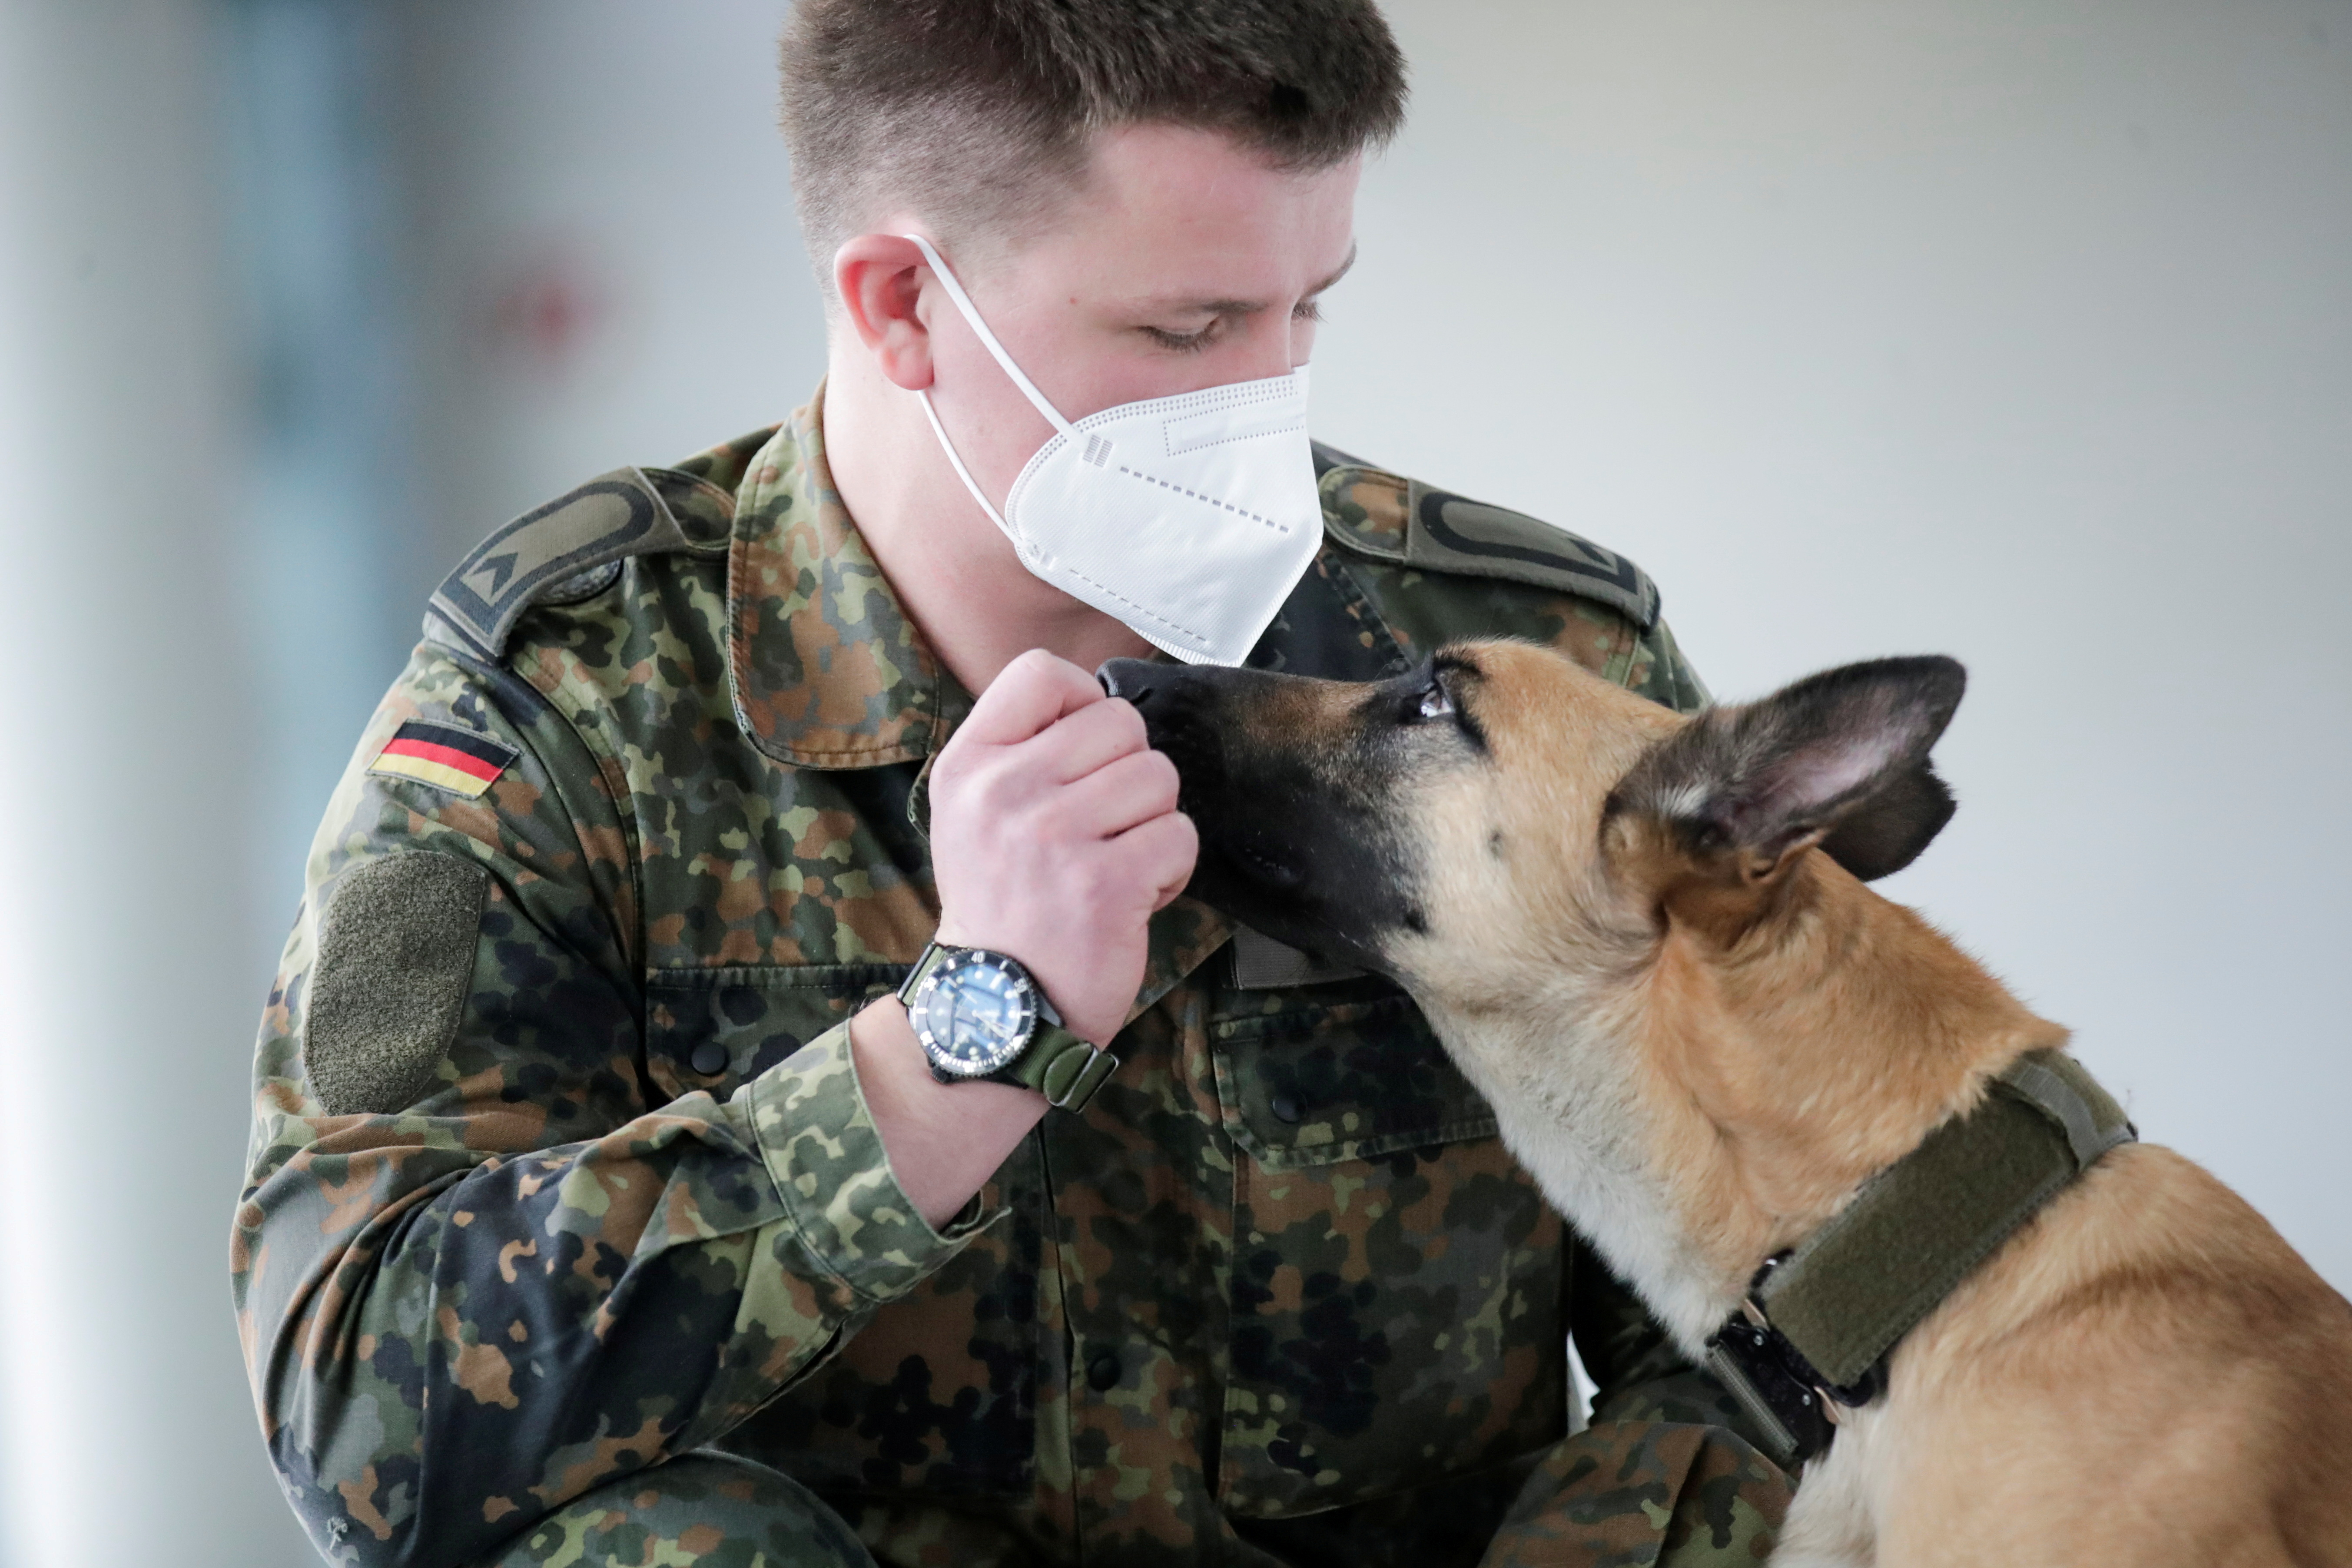 A member of a military poses with Filou, the 3-year-old Belgian shepherd which is able to detect COVID-19 in humans' saliva samples in Hanover